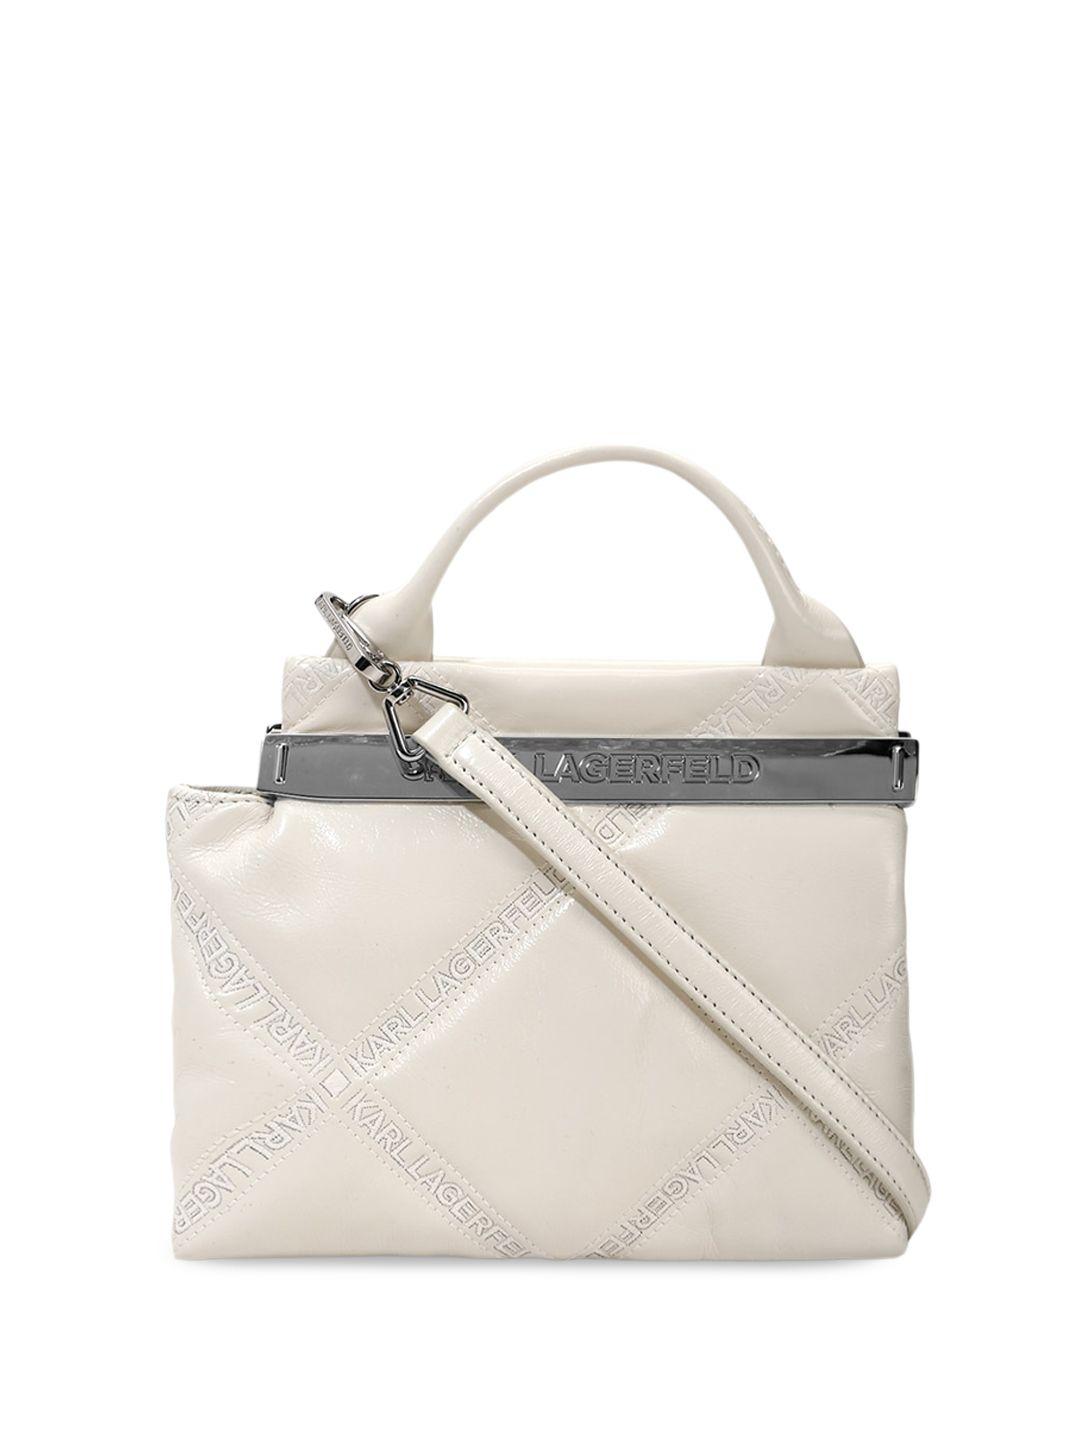 karl lagerfeld textured leather quilted structured handheld bag